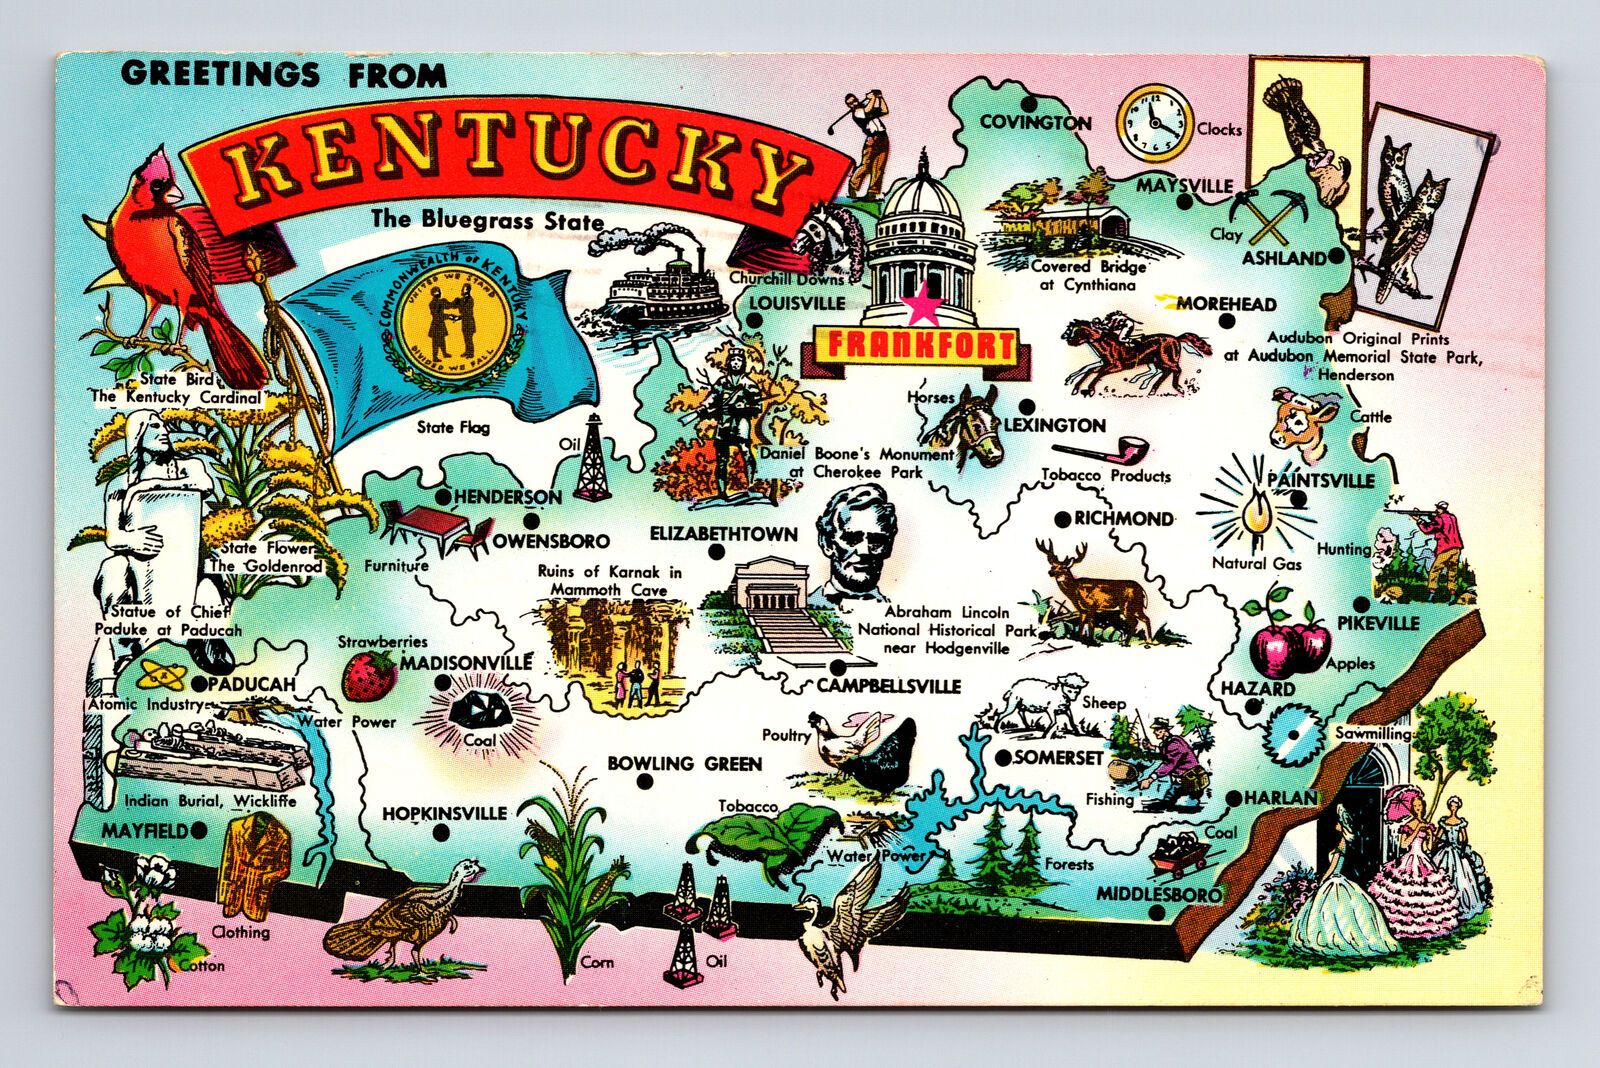 1964 Pictorial Tourist Landmark Map Greetings From State of Kentucky KY Postcard